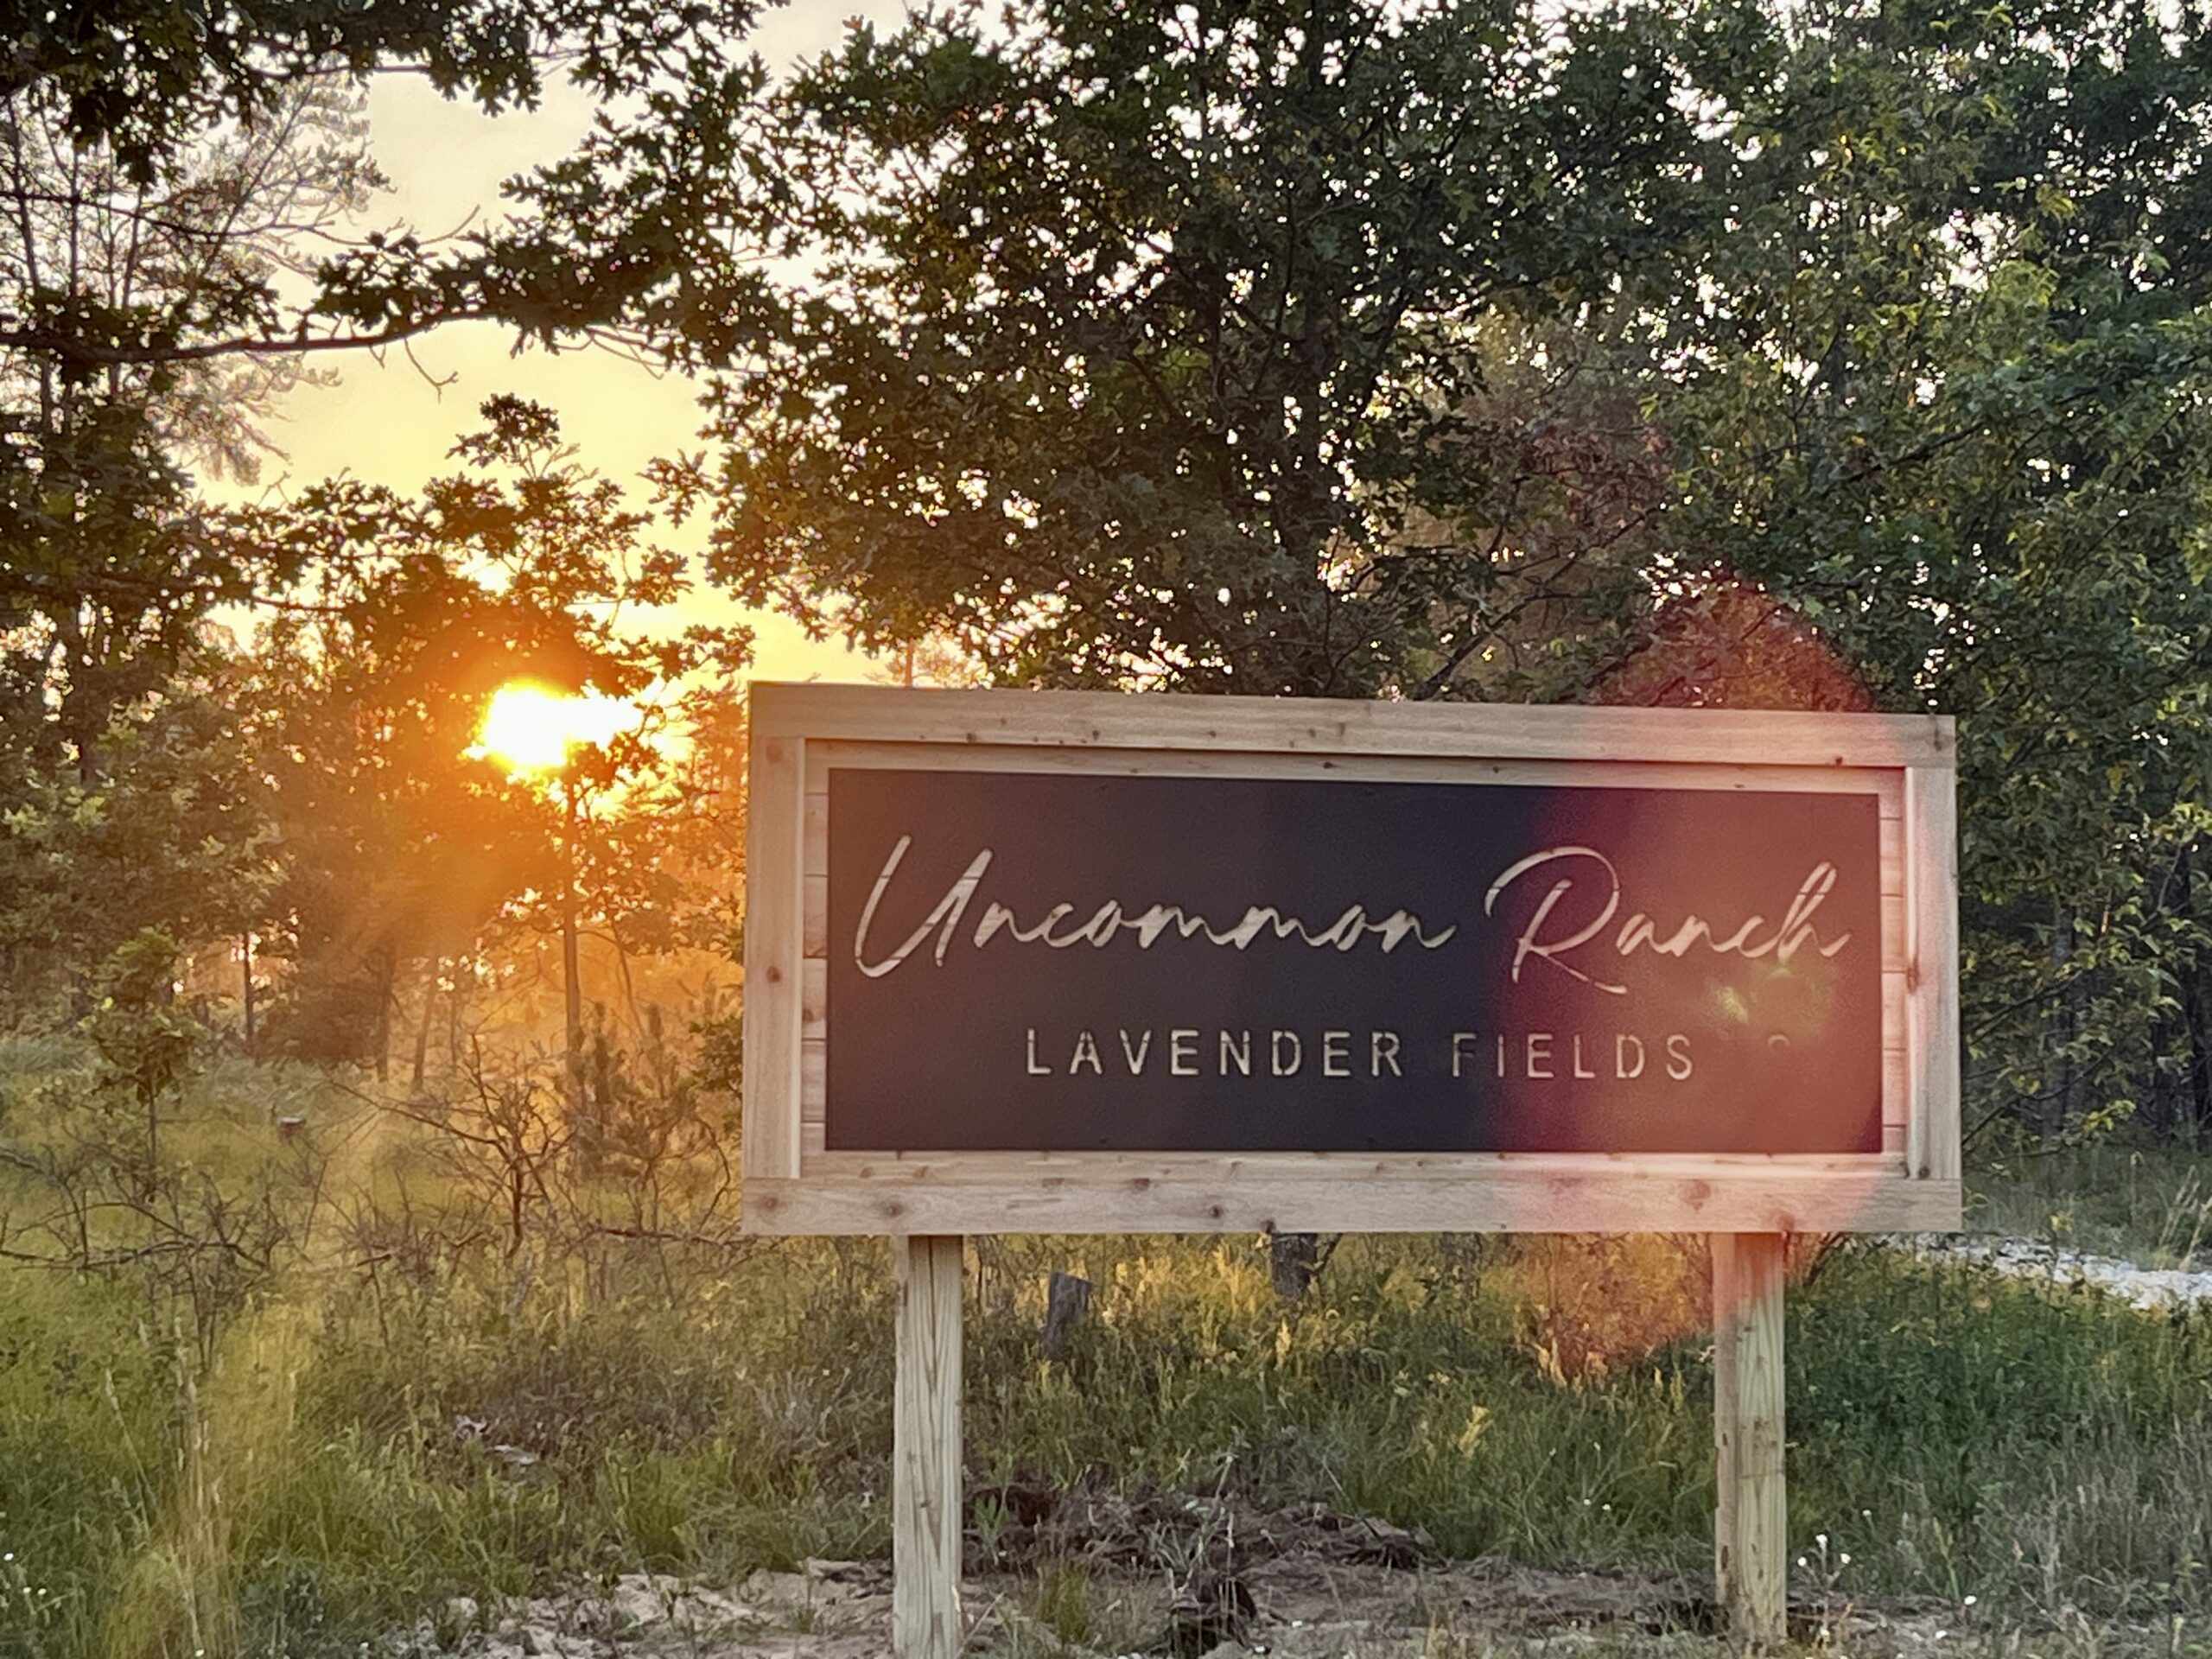 A picturesque scene of the Uncommon Ranch Lavender Fields sign against the backdrop of a stunning sunset, inviting tranquility and beauty.